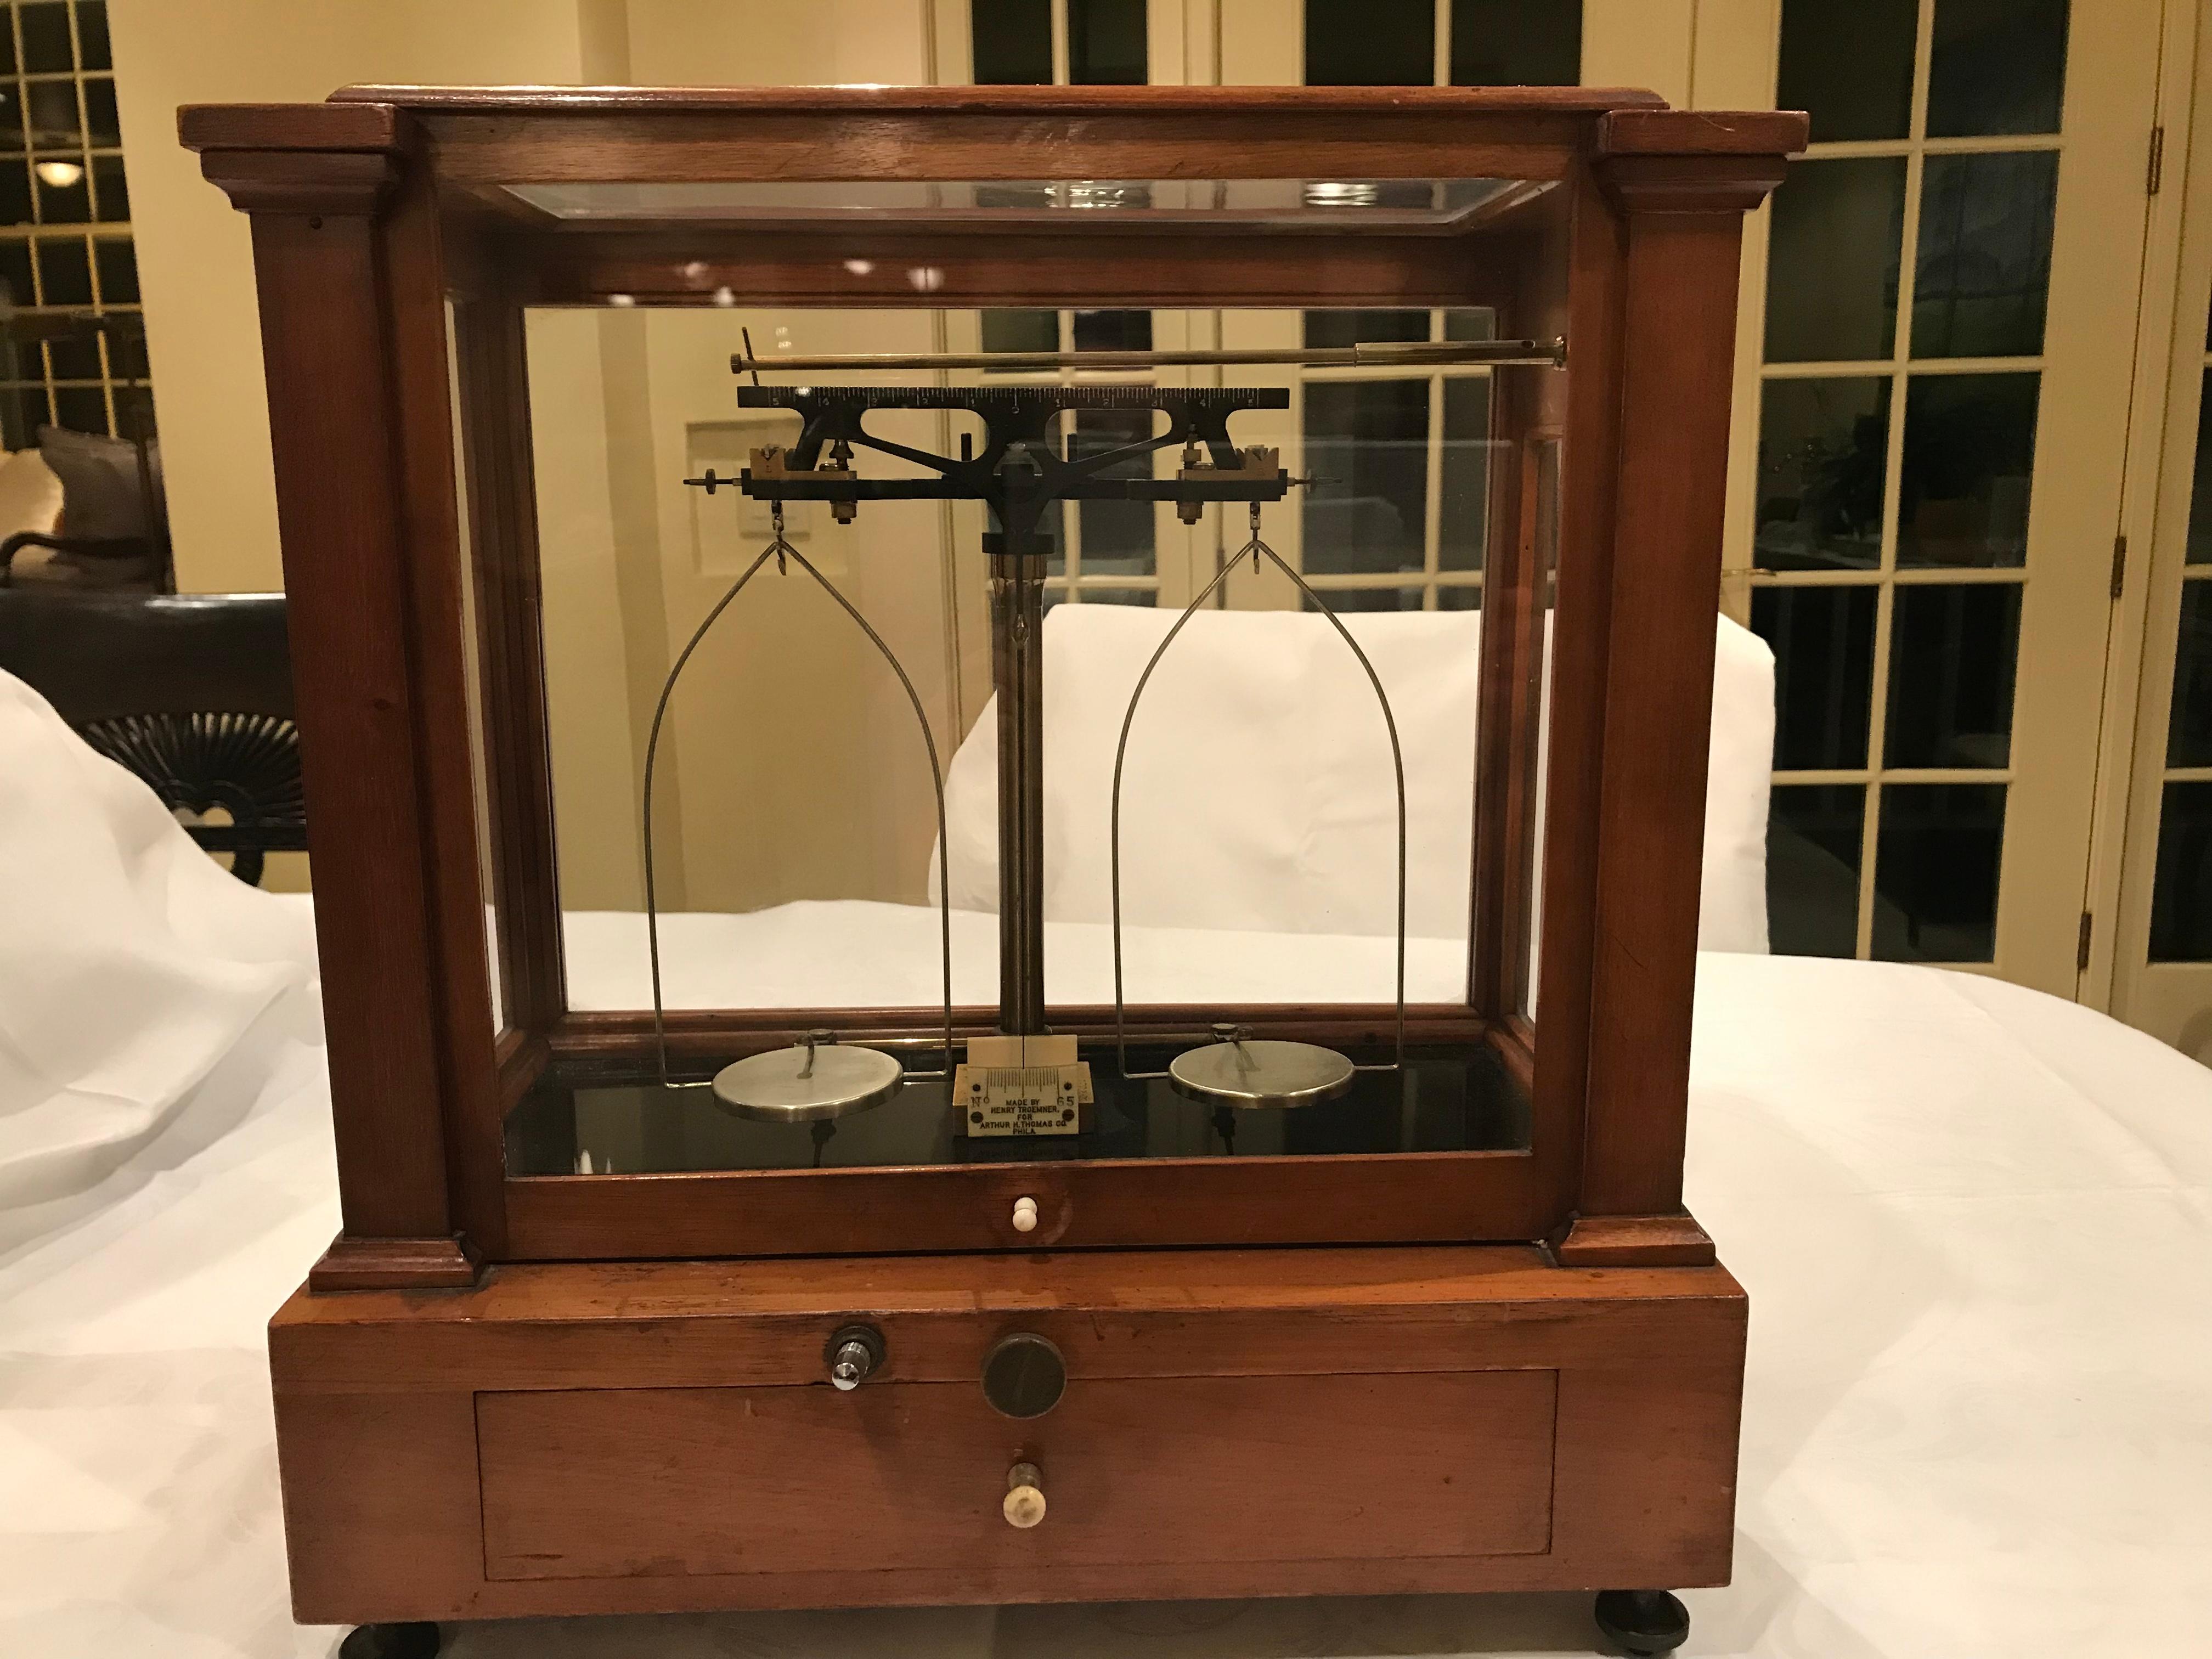 Forged 19th Century Gold/Apothecary Desktop Scale in Cherry and Brass by Henry Troemner For Sale